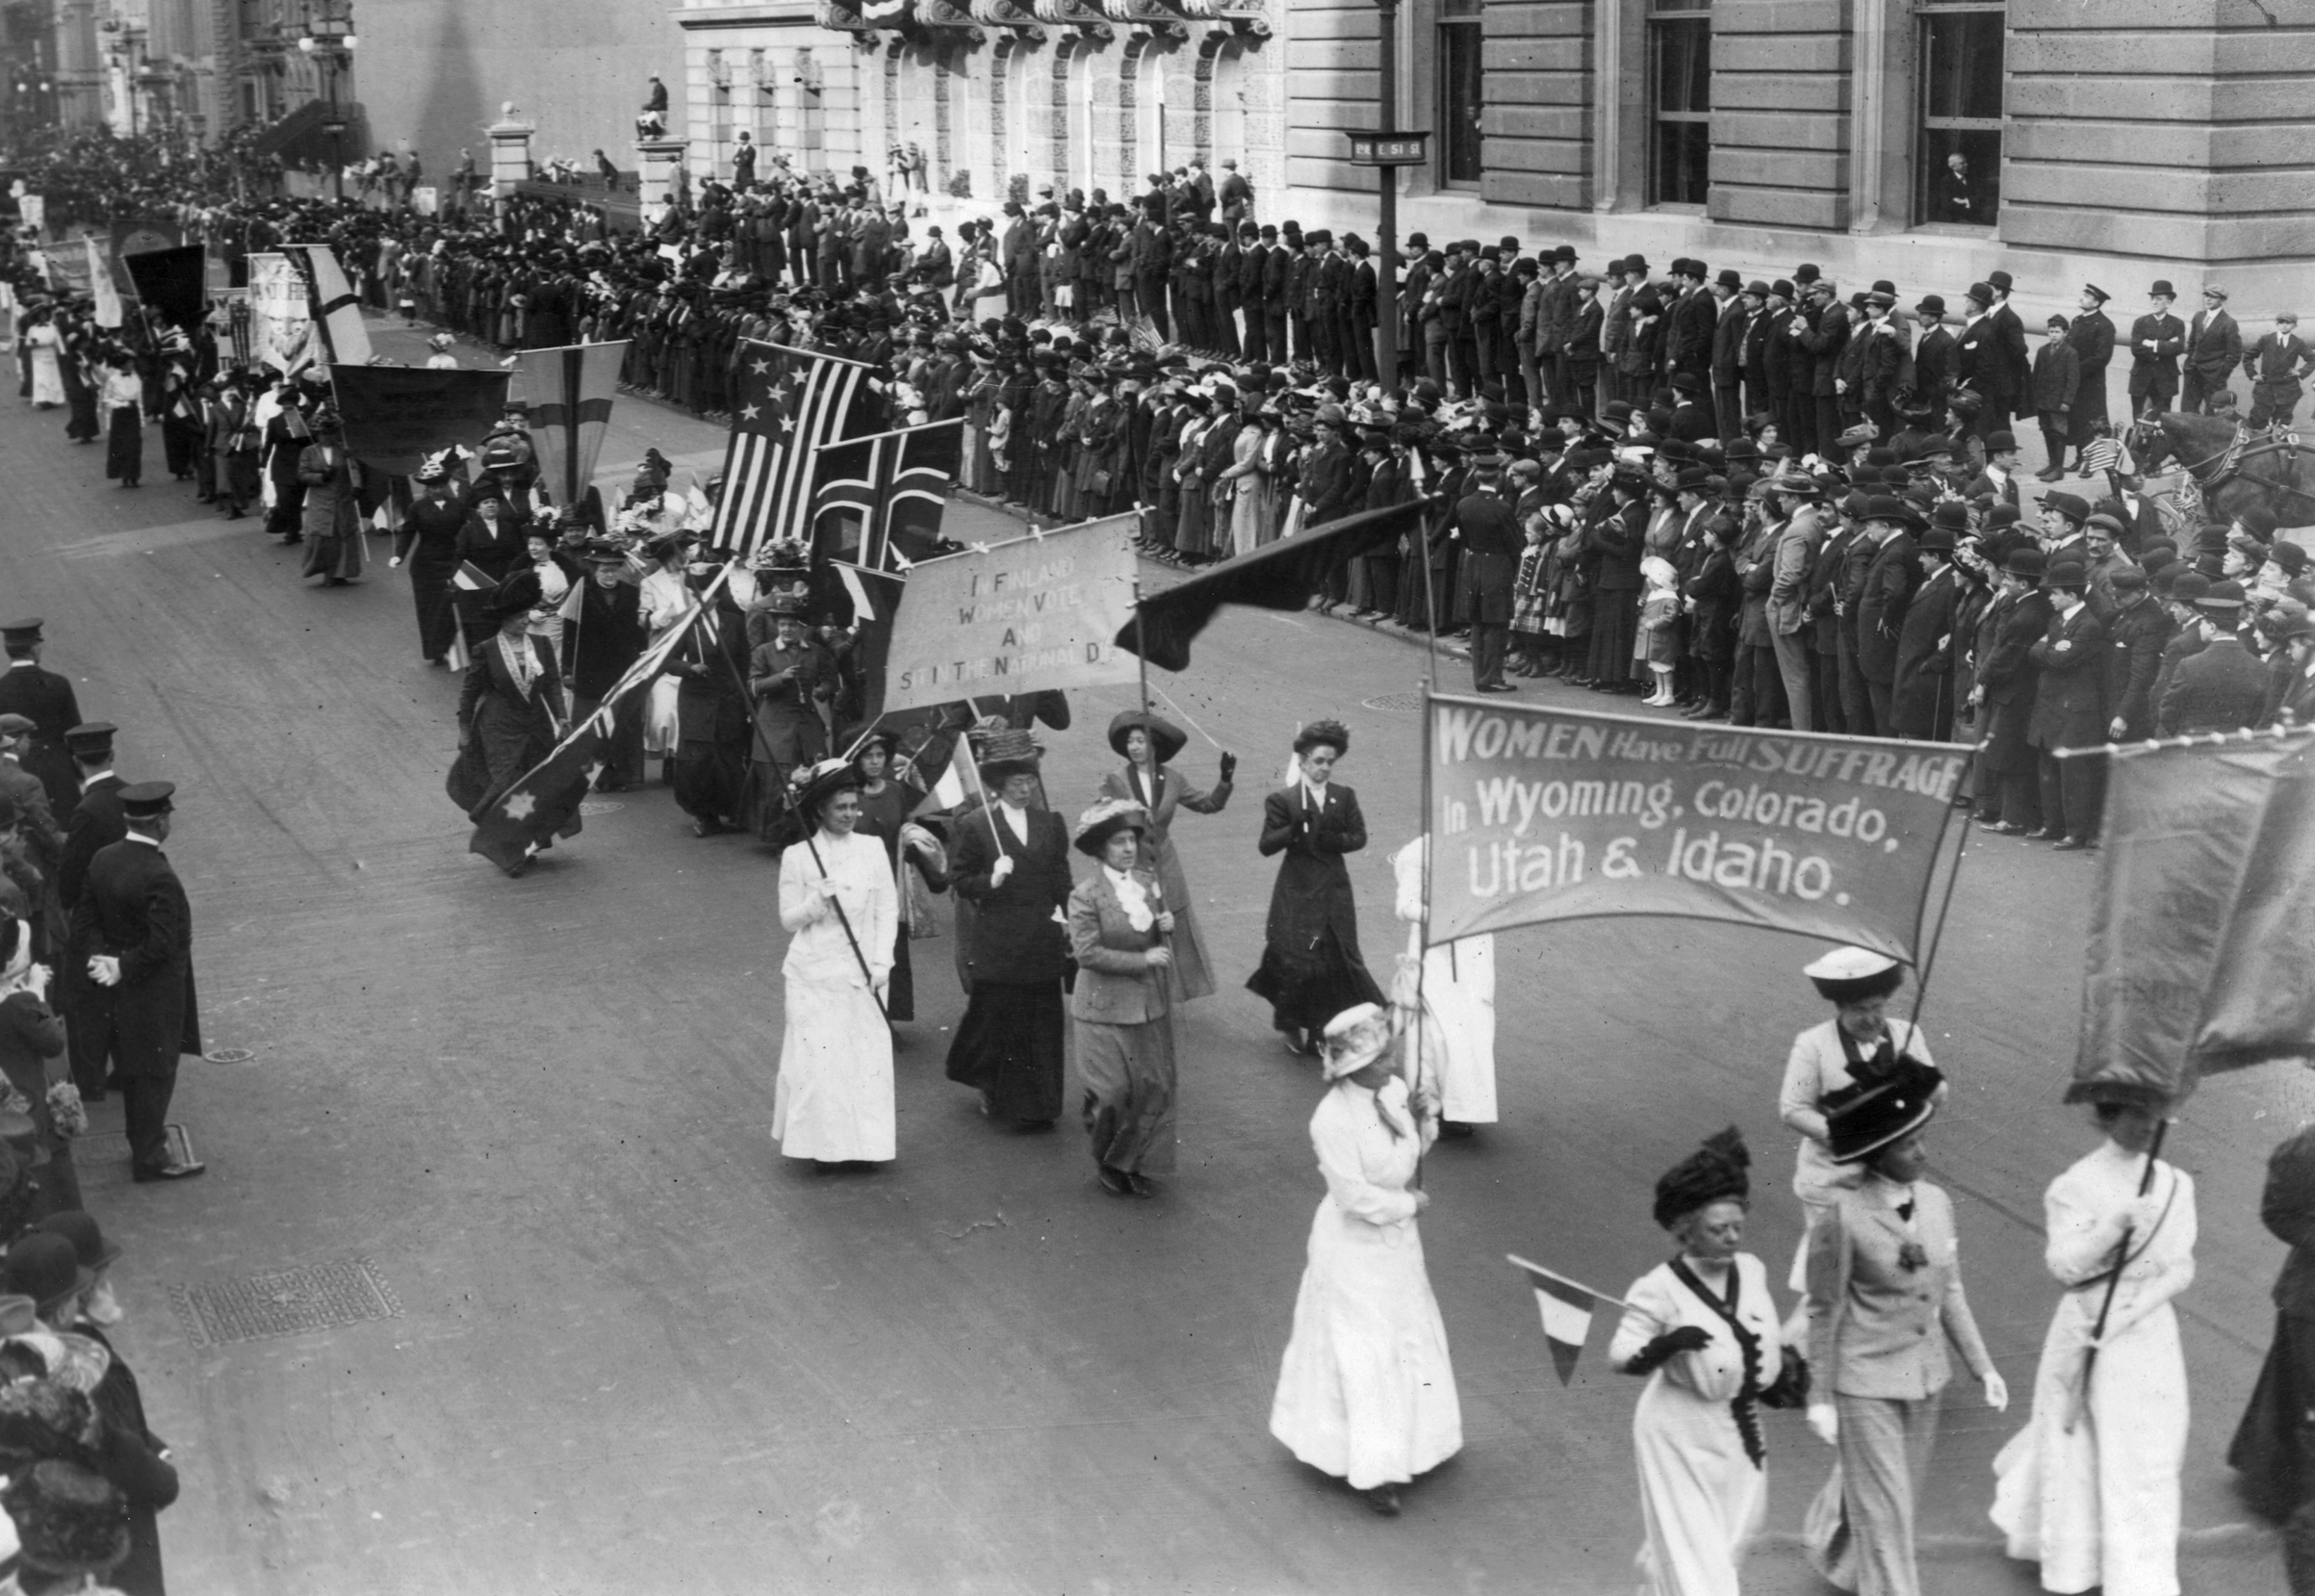 Suffragettes carrying a banner announcing that 'Women have full suffrage in Wyoming, Colorado, Utah and Idaho' at the Women of all Nations Parade in New York on May 3, 1916 (Paul Thompson—Getty Images)